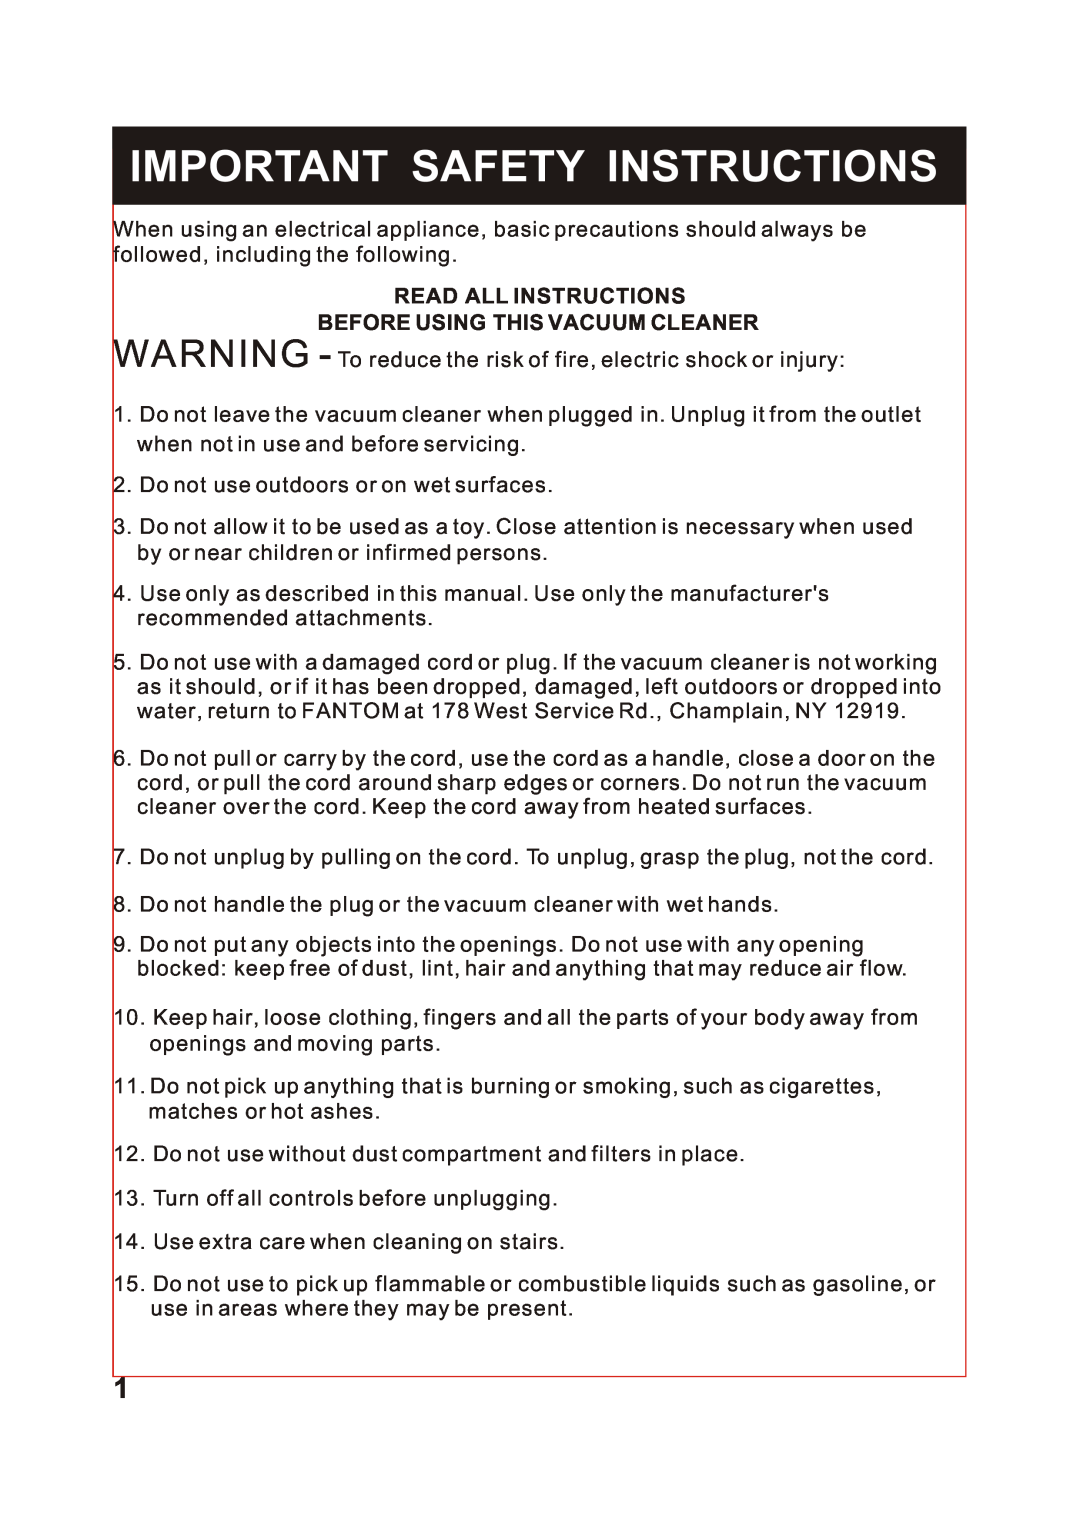 Fantom Vacuum FM740 Important Safety Instructions, WARNING - To reduce the risk of fire, electric shock or injury 